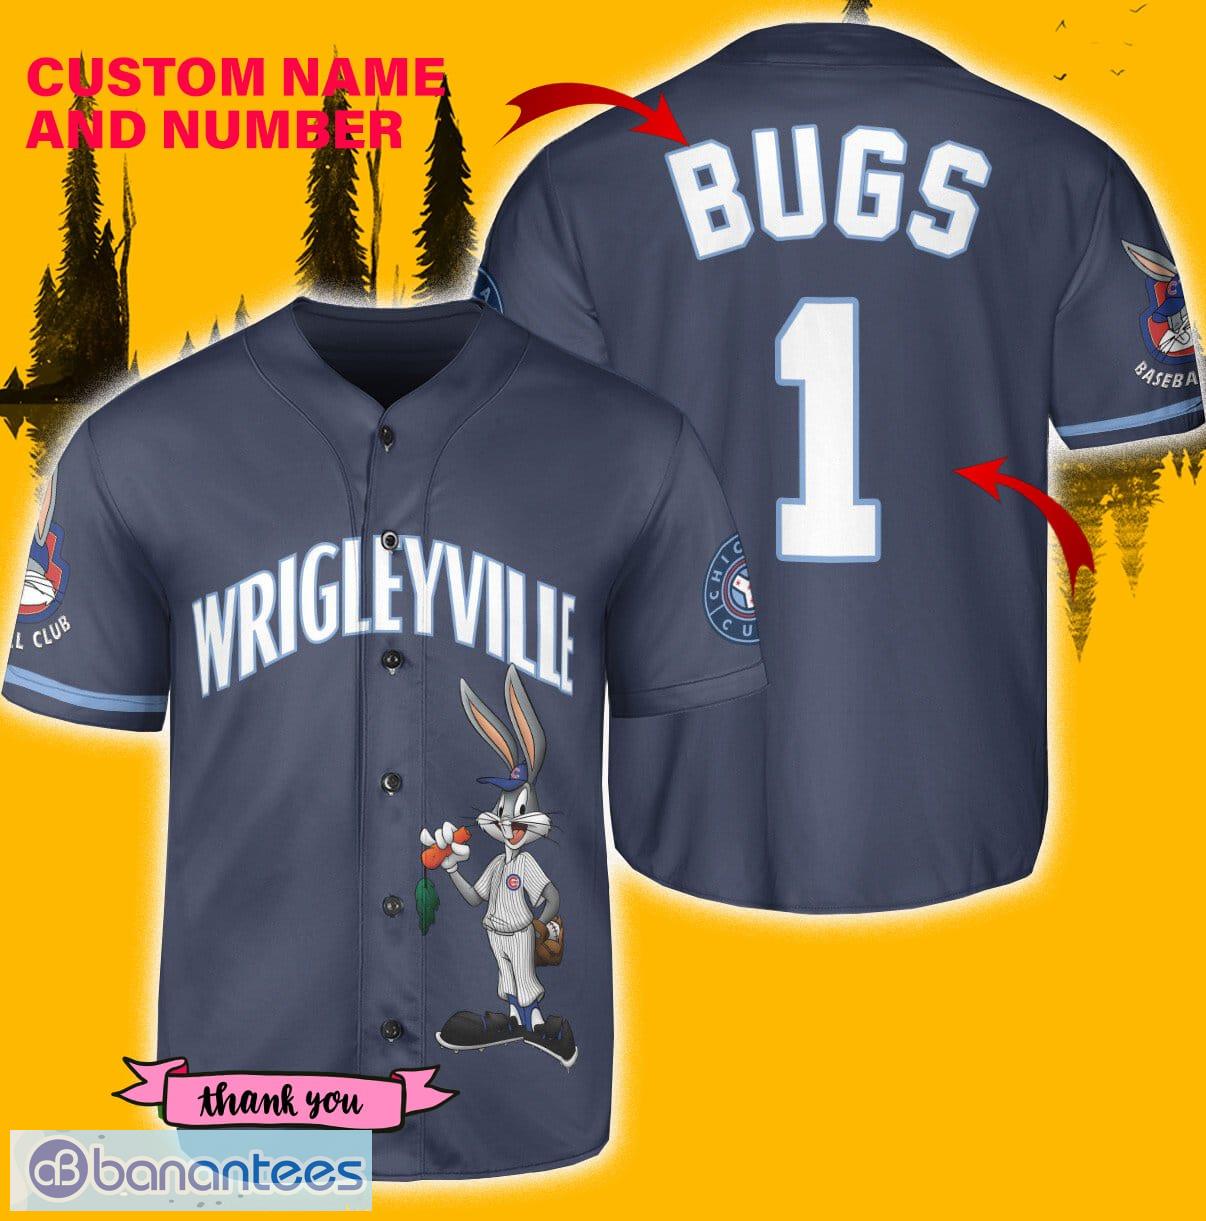 Chicago Cubs Looney Tunes Bugs Bunny Jersey Baseball ShirtBL